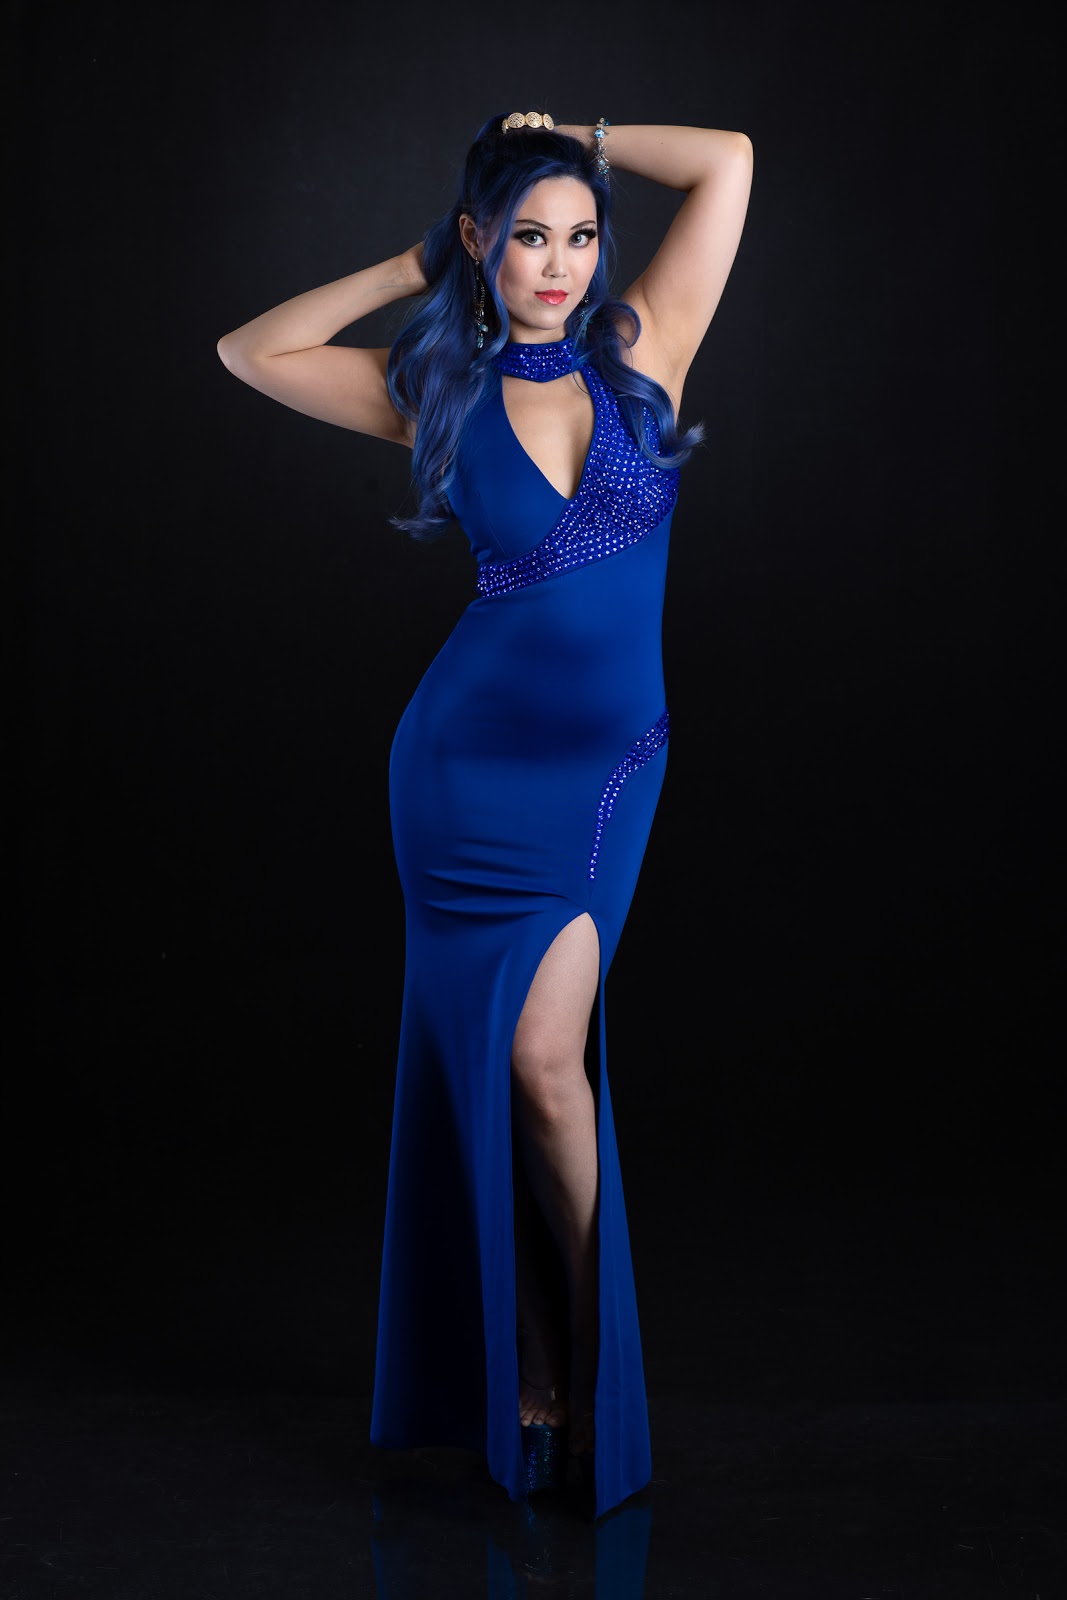 Model Photographic: The Blue Dress